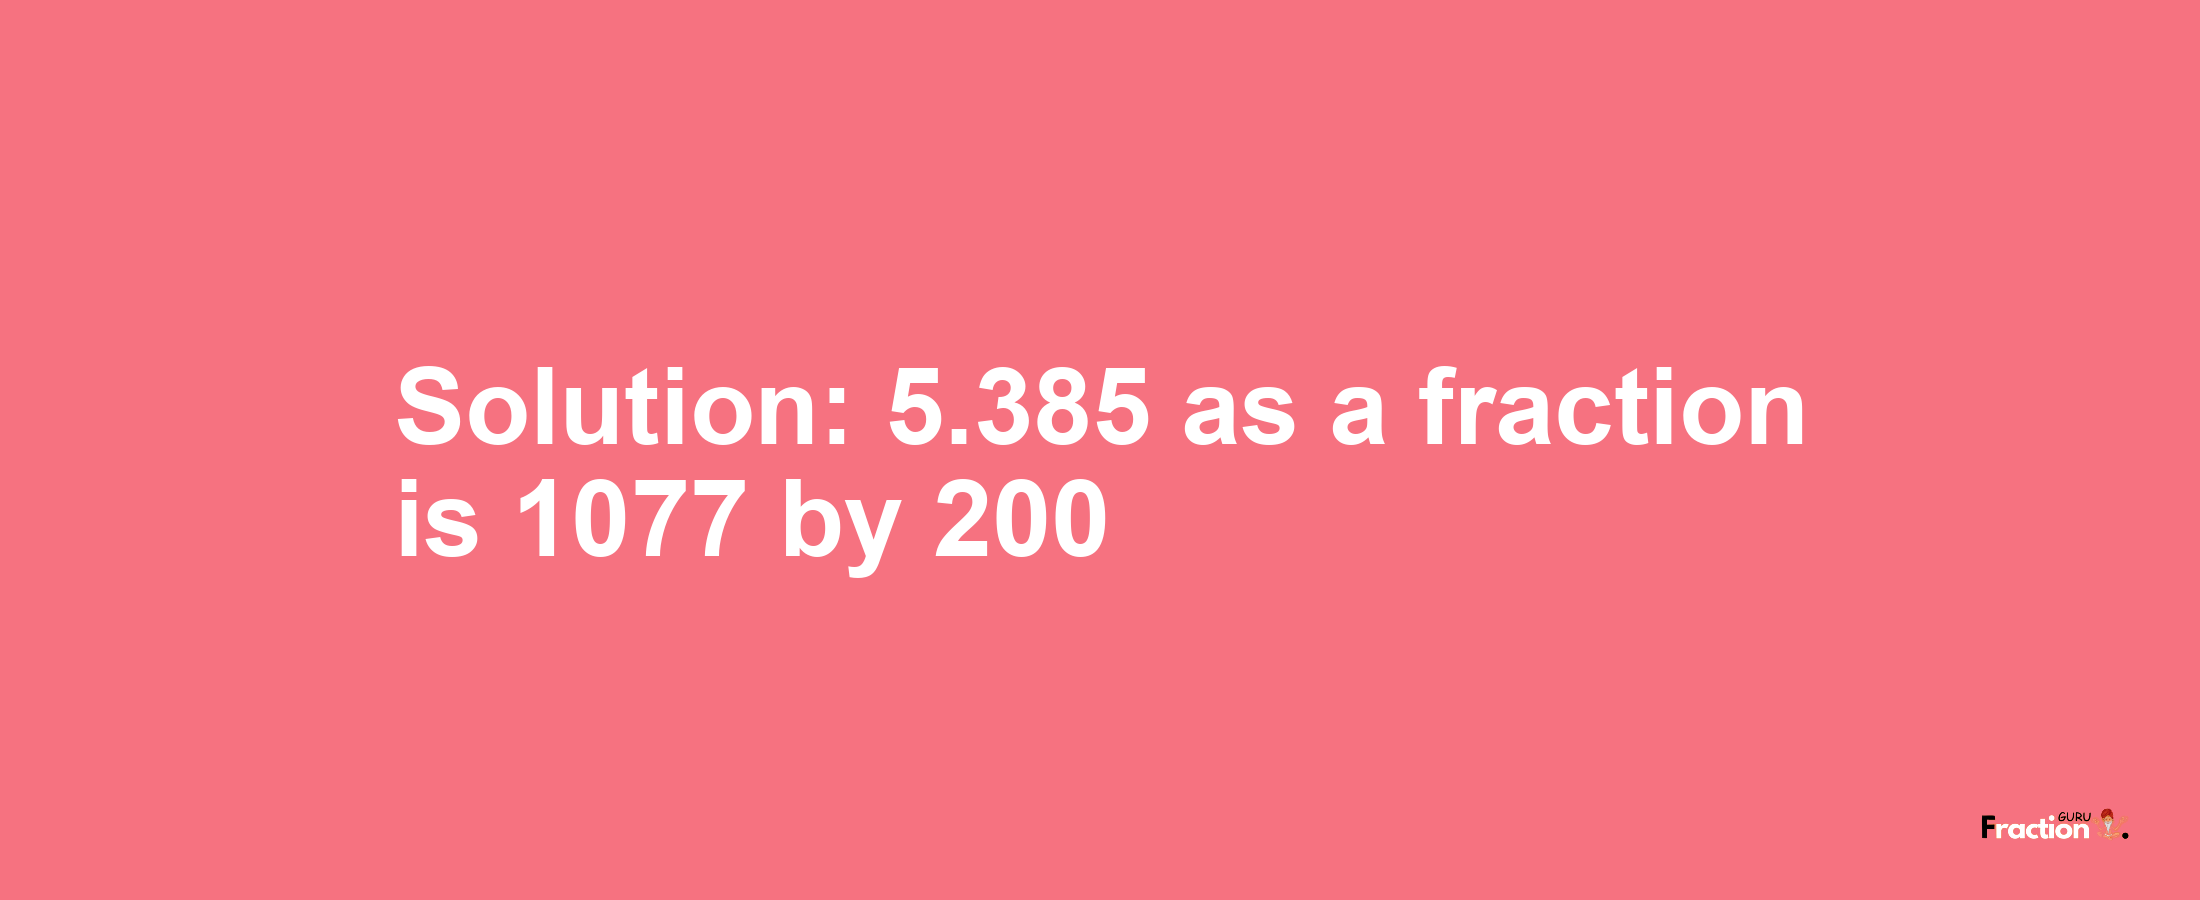 Solution:5.385 as a fraction is 1077/200